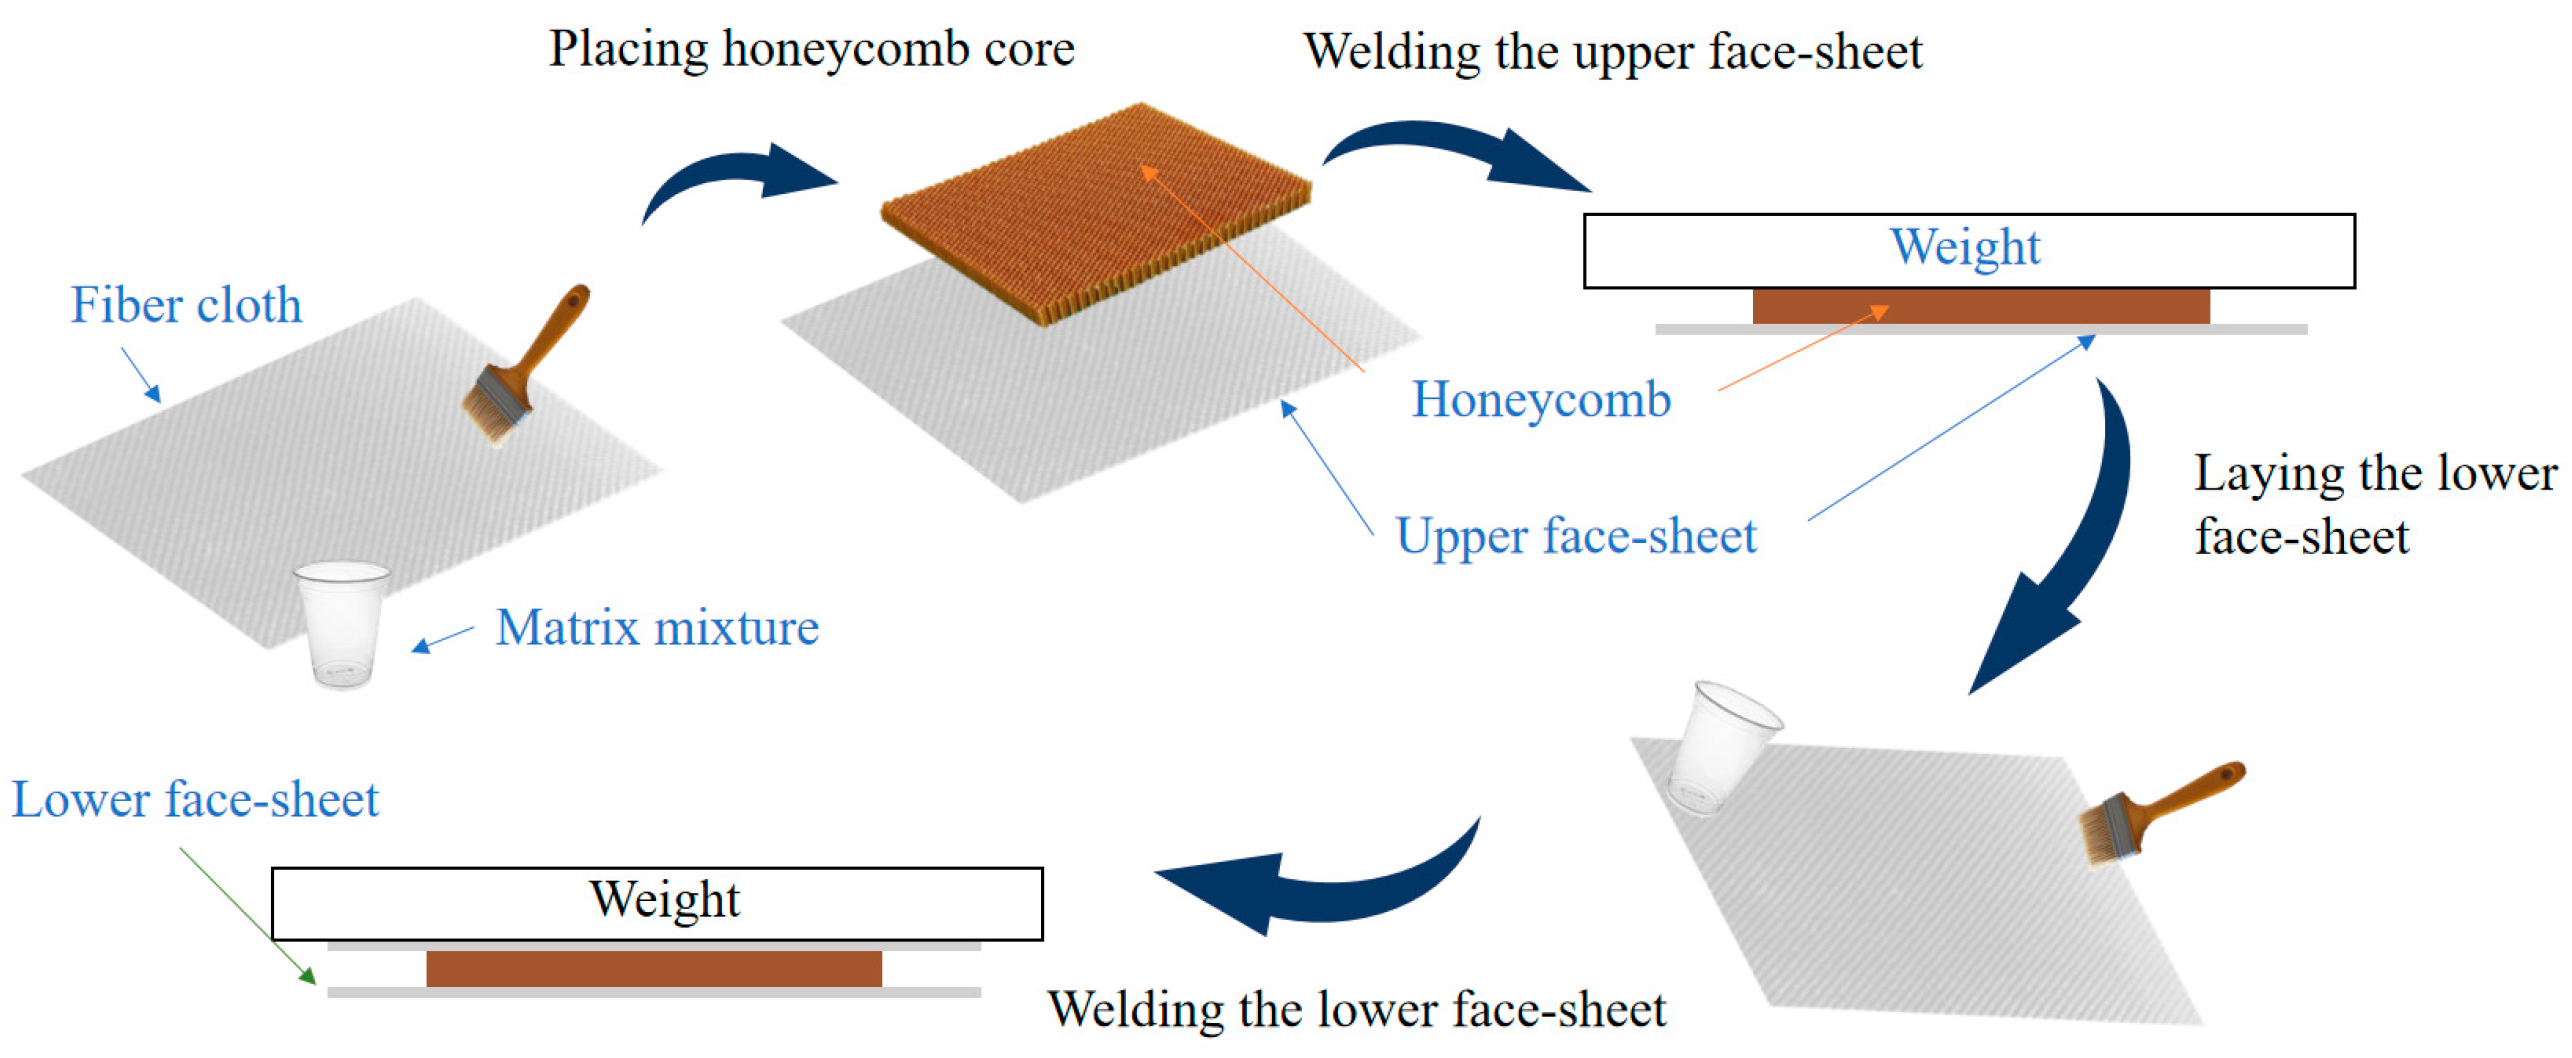 Through-thickness compression testing of the honeycomb core